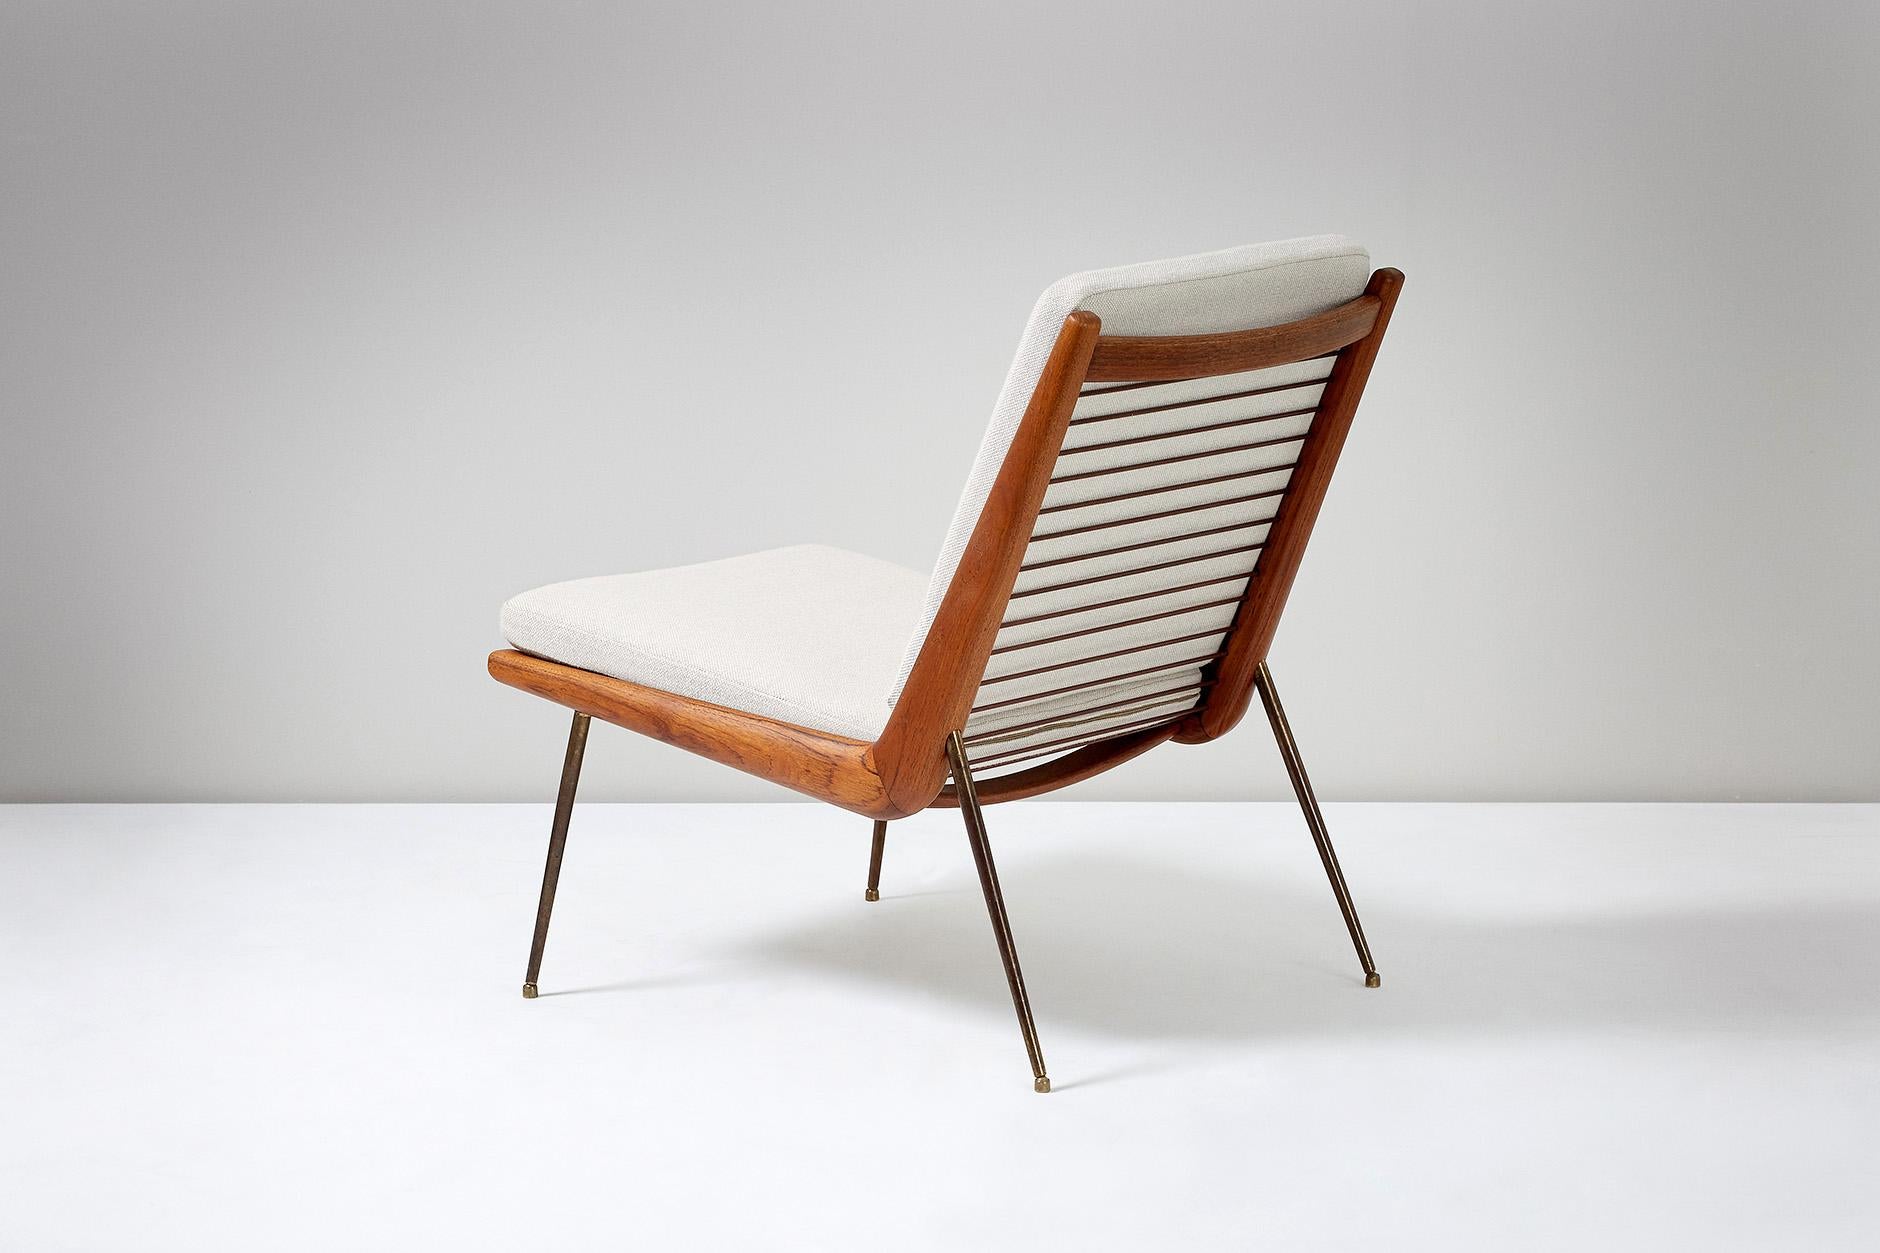 Peter Hvidt & Orla Molgaard-Nielsen

Boomerang Chair, 1954

Teak lounge chair produced by France & Son, Denmark with patinated brass plated legs. New cushions covered in Kvadrat wool fabric. 

Measures: H 79cm, D 74cm, W 64cm.